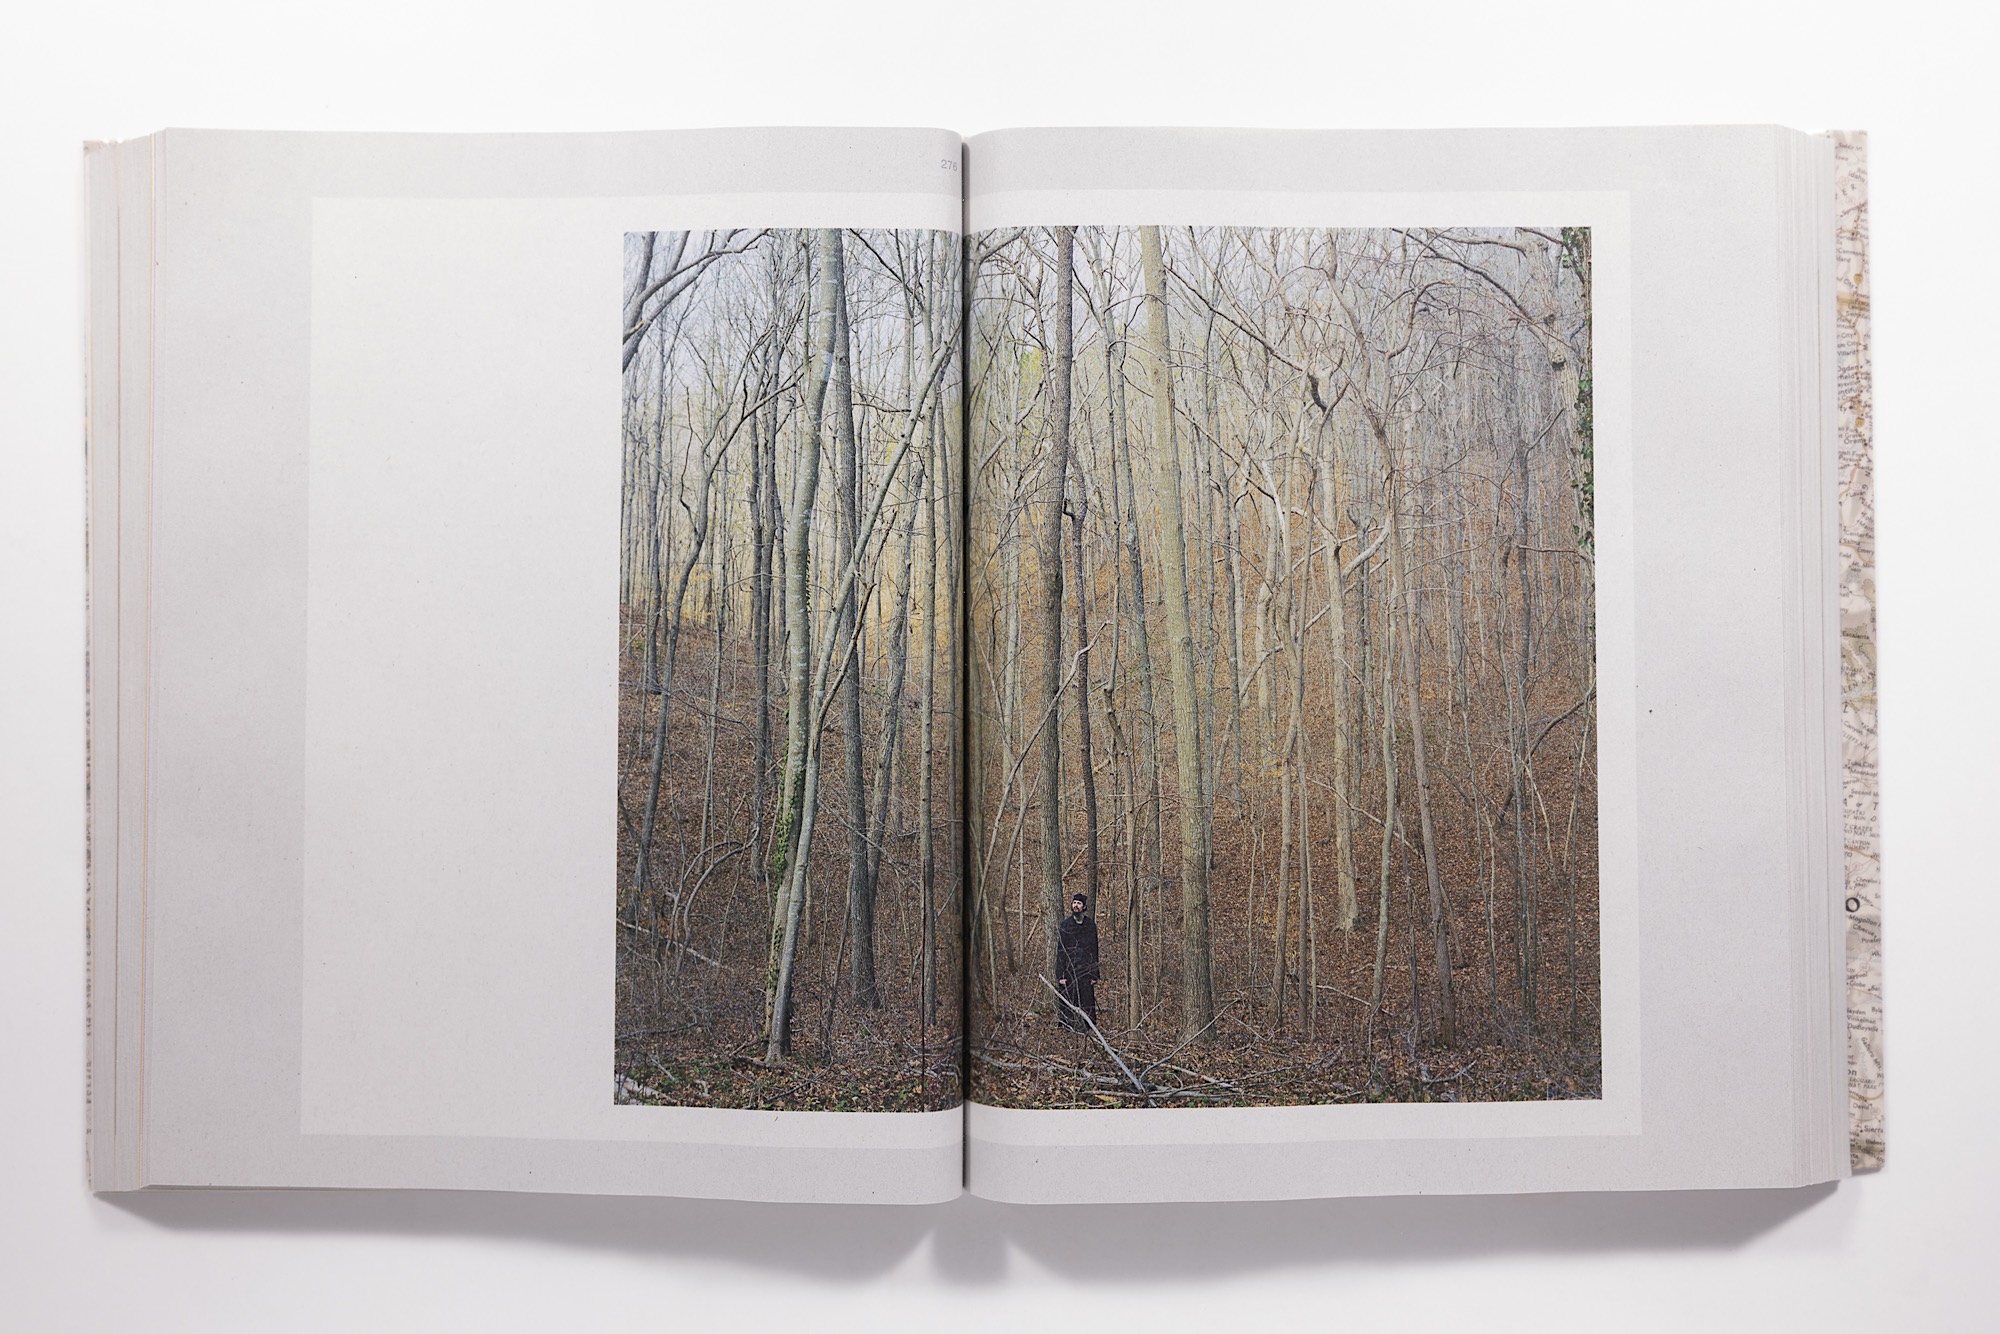 Alec Soth - Gathered Leaves Annotated Image 11